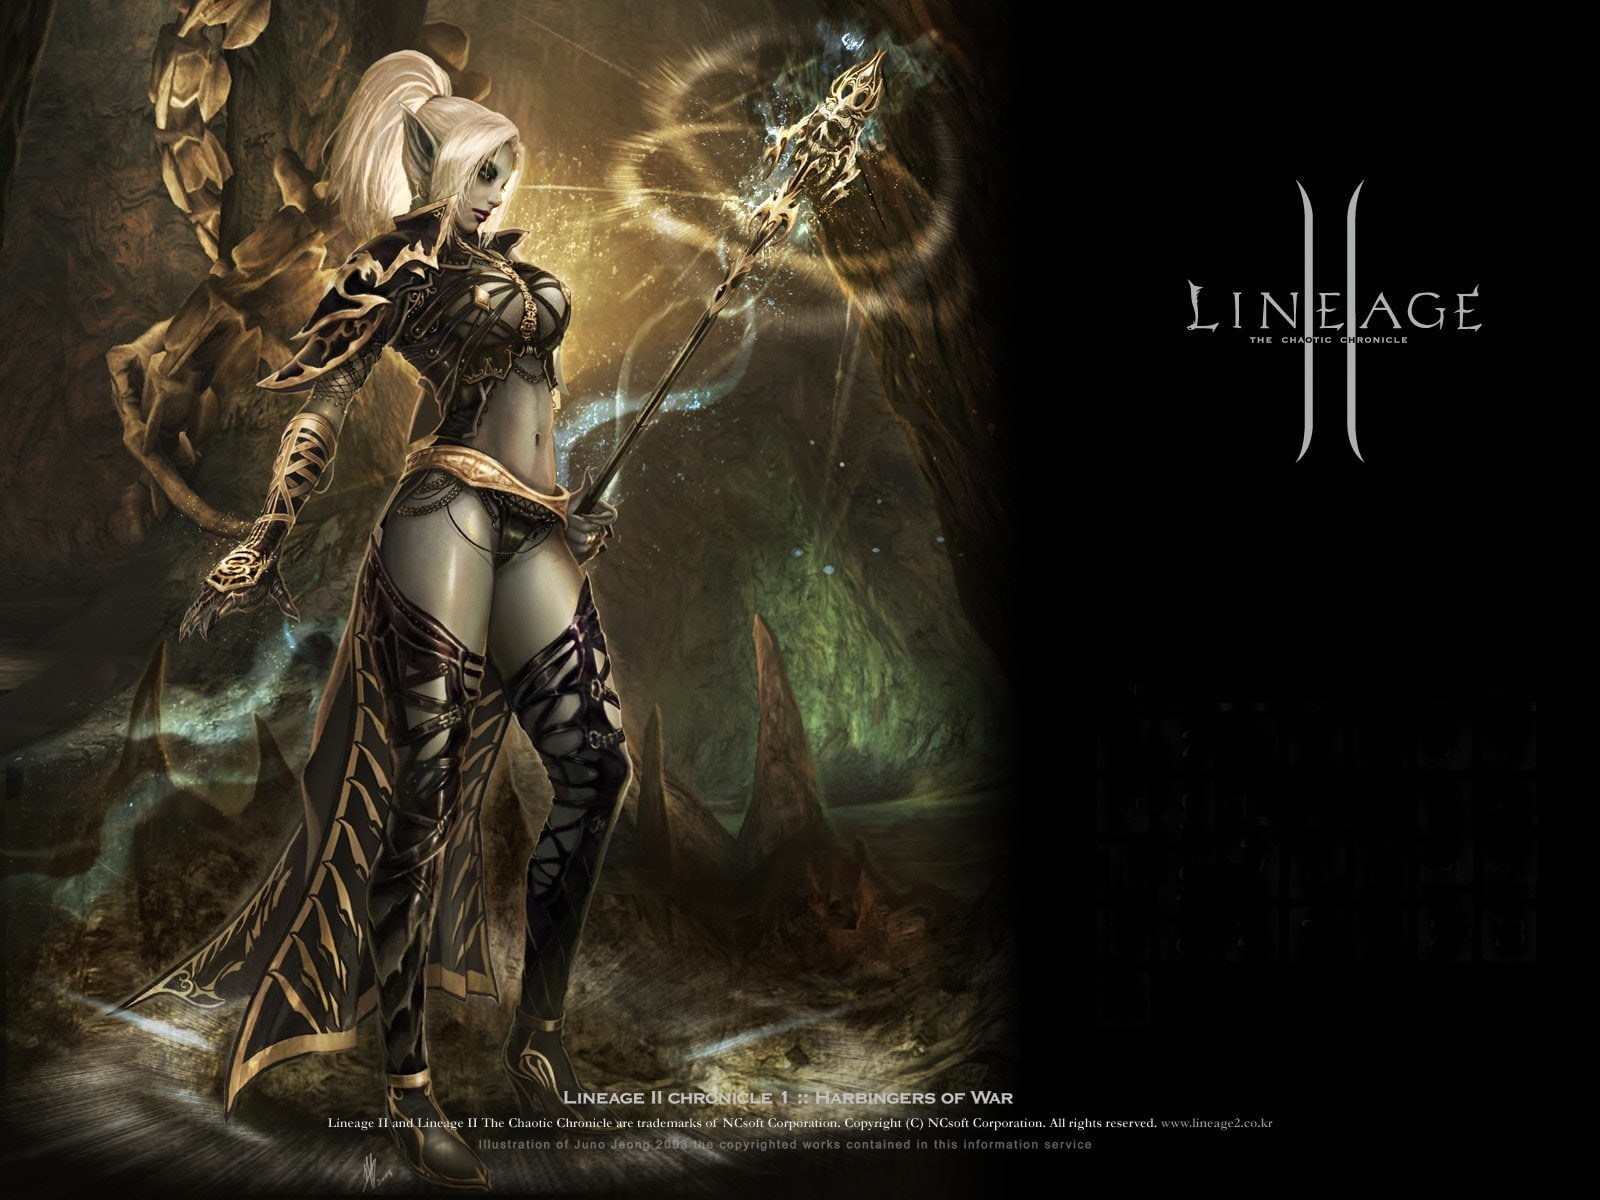 Lineage, Lineage II, one person, human representation, art and craft